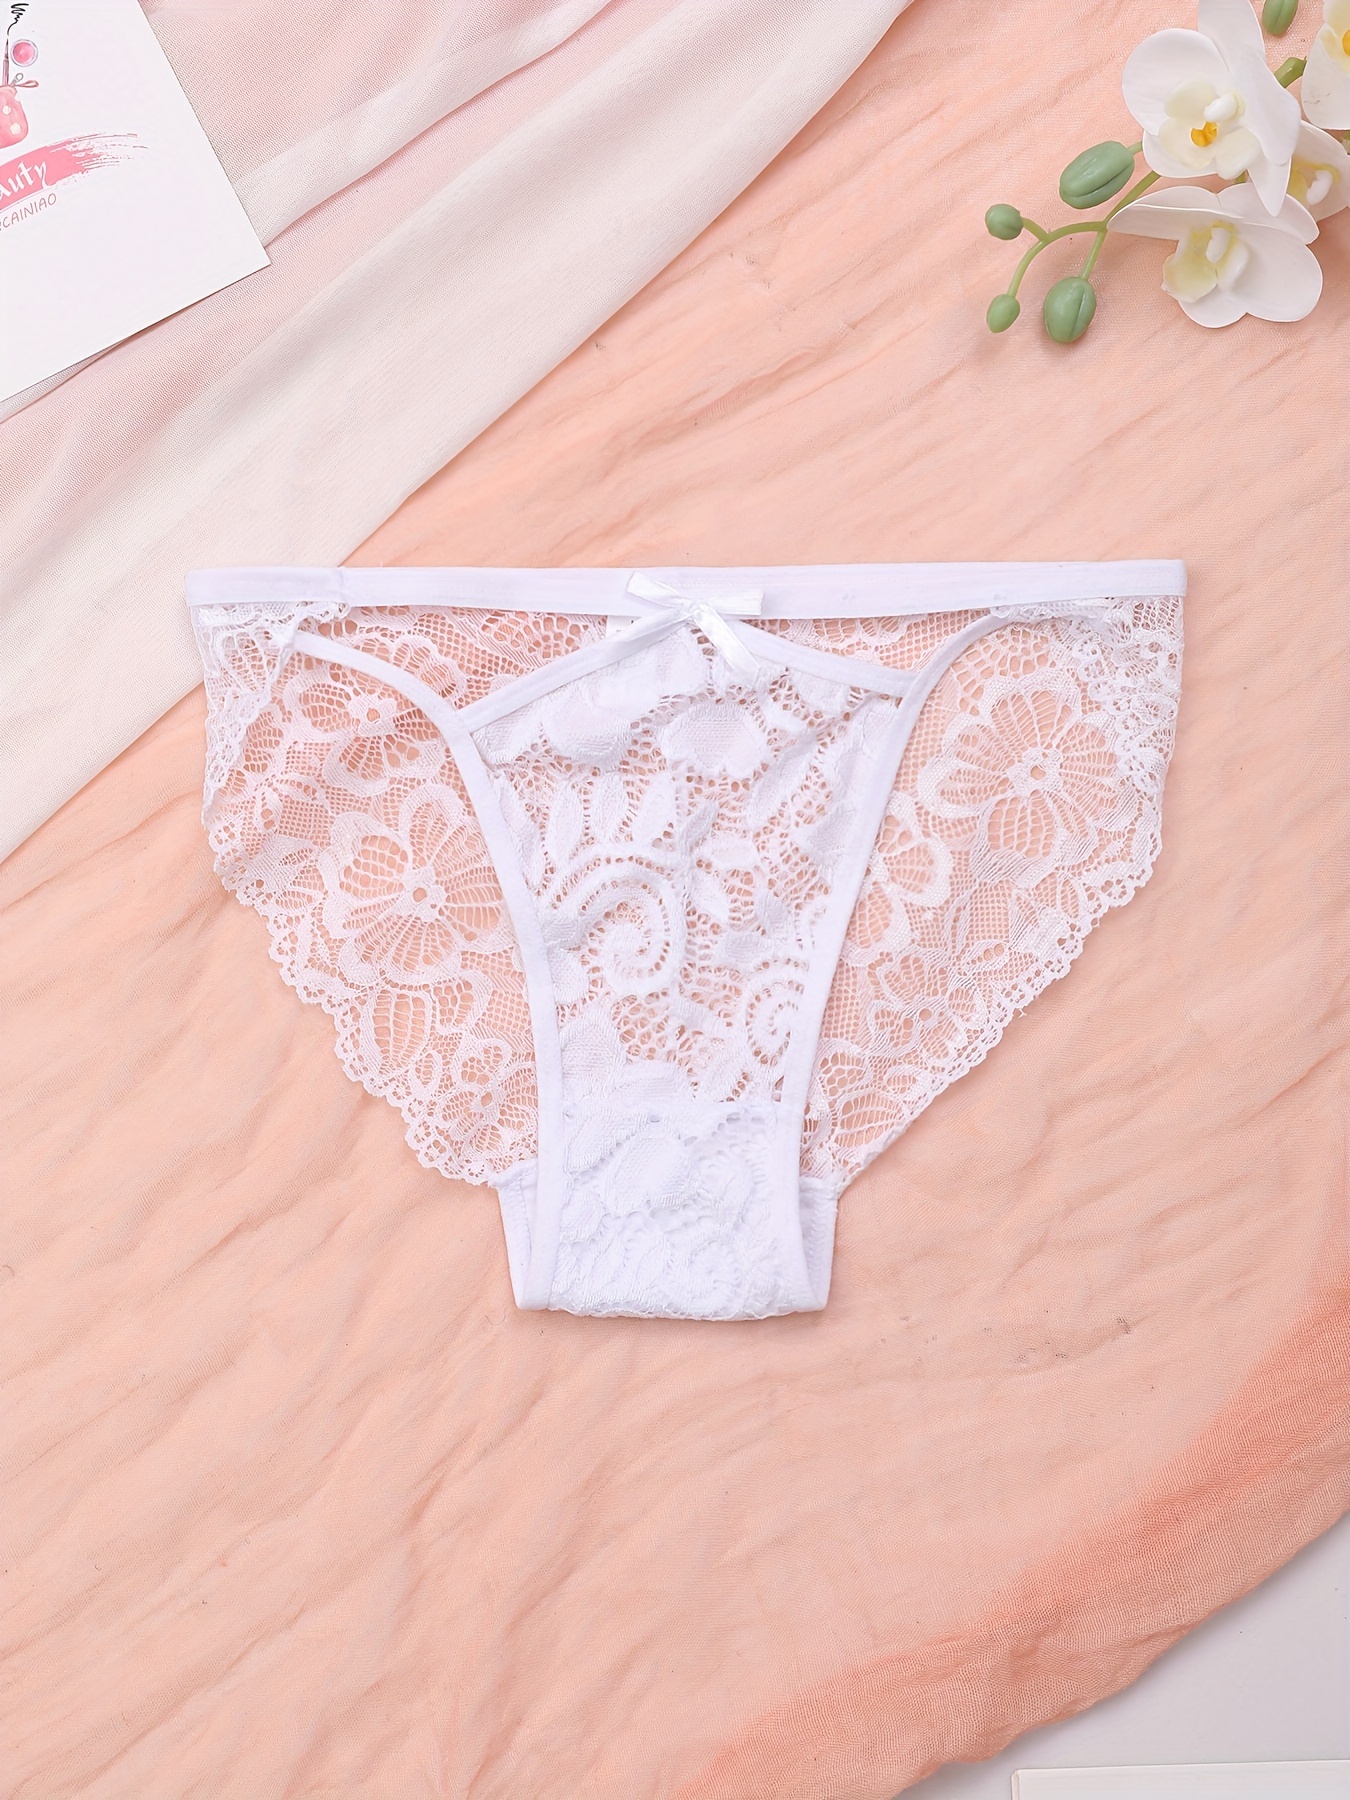 Women's Sexy Lace Underwear Panties Delicate Soft Comfortable